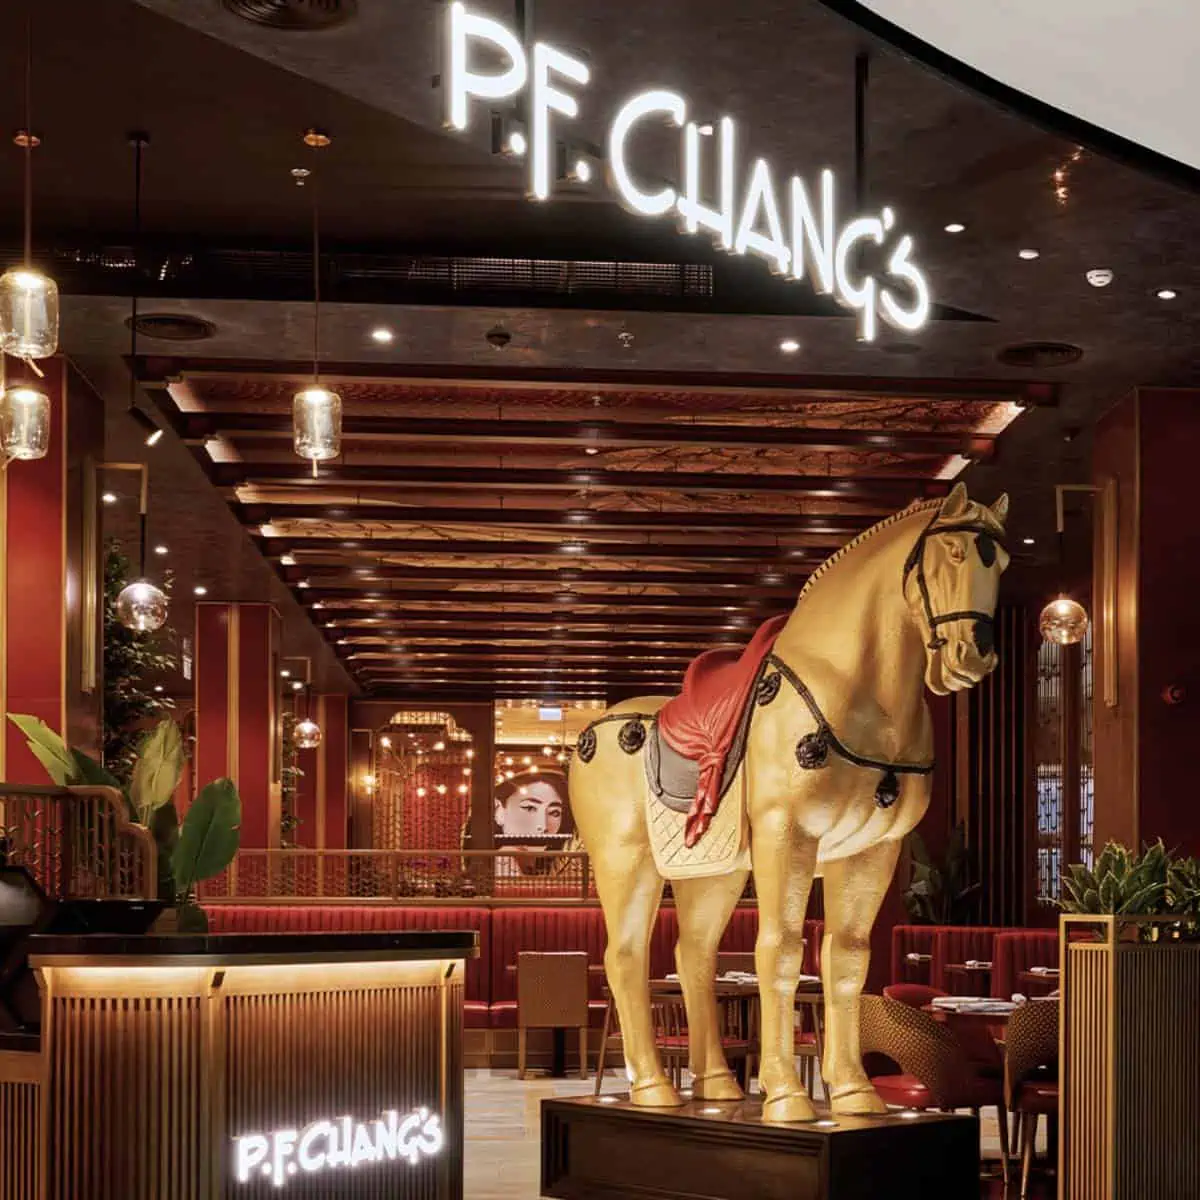 Inside the PF Changs restaurant with the horse statue and sign.